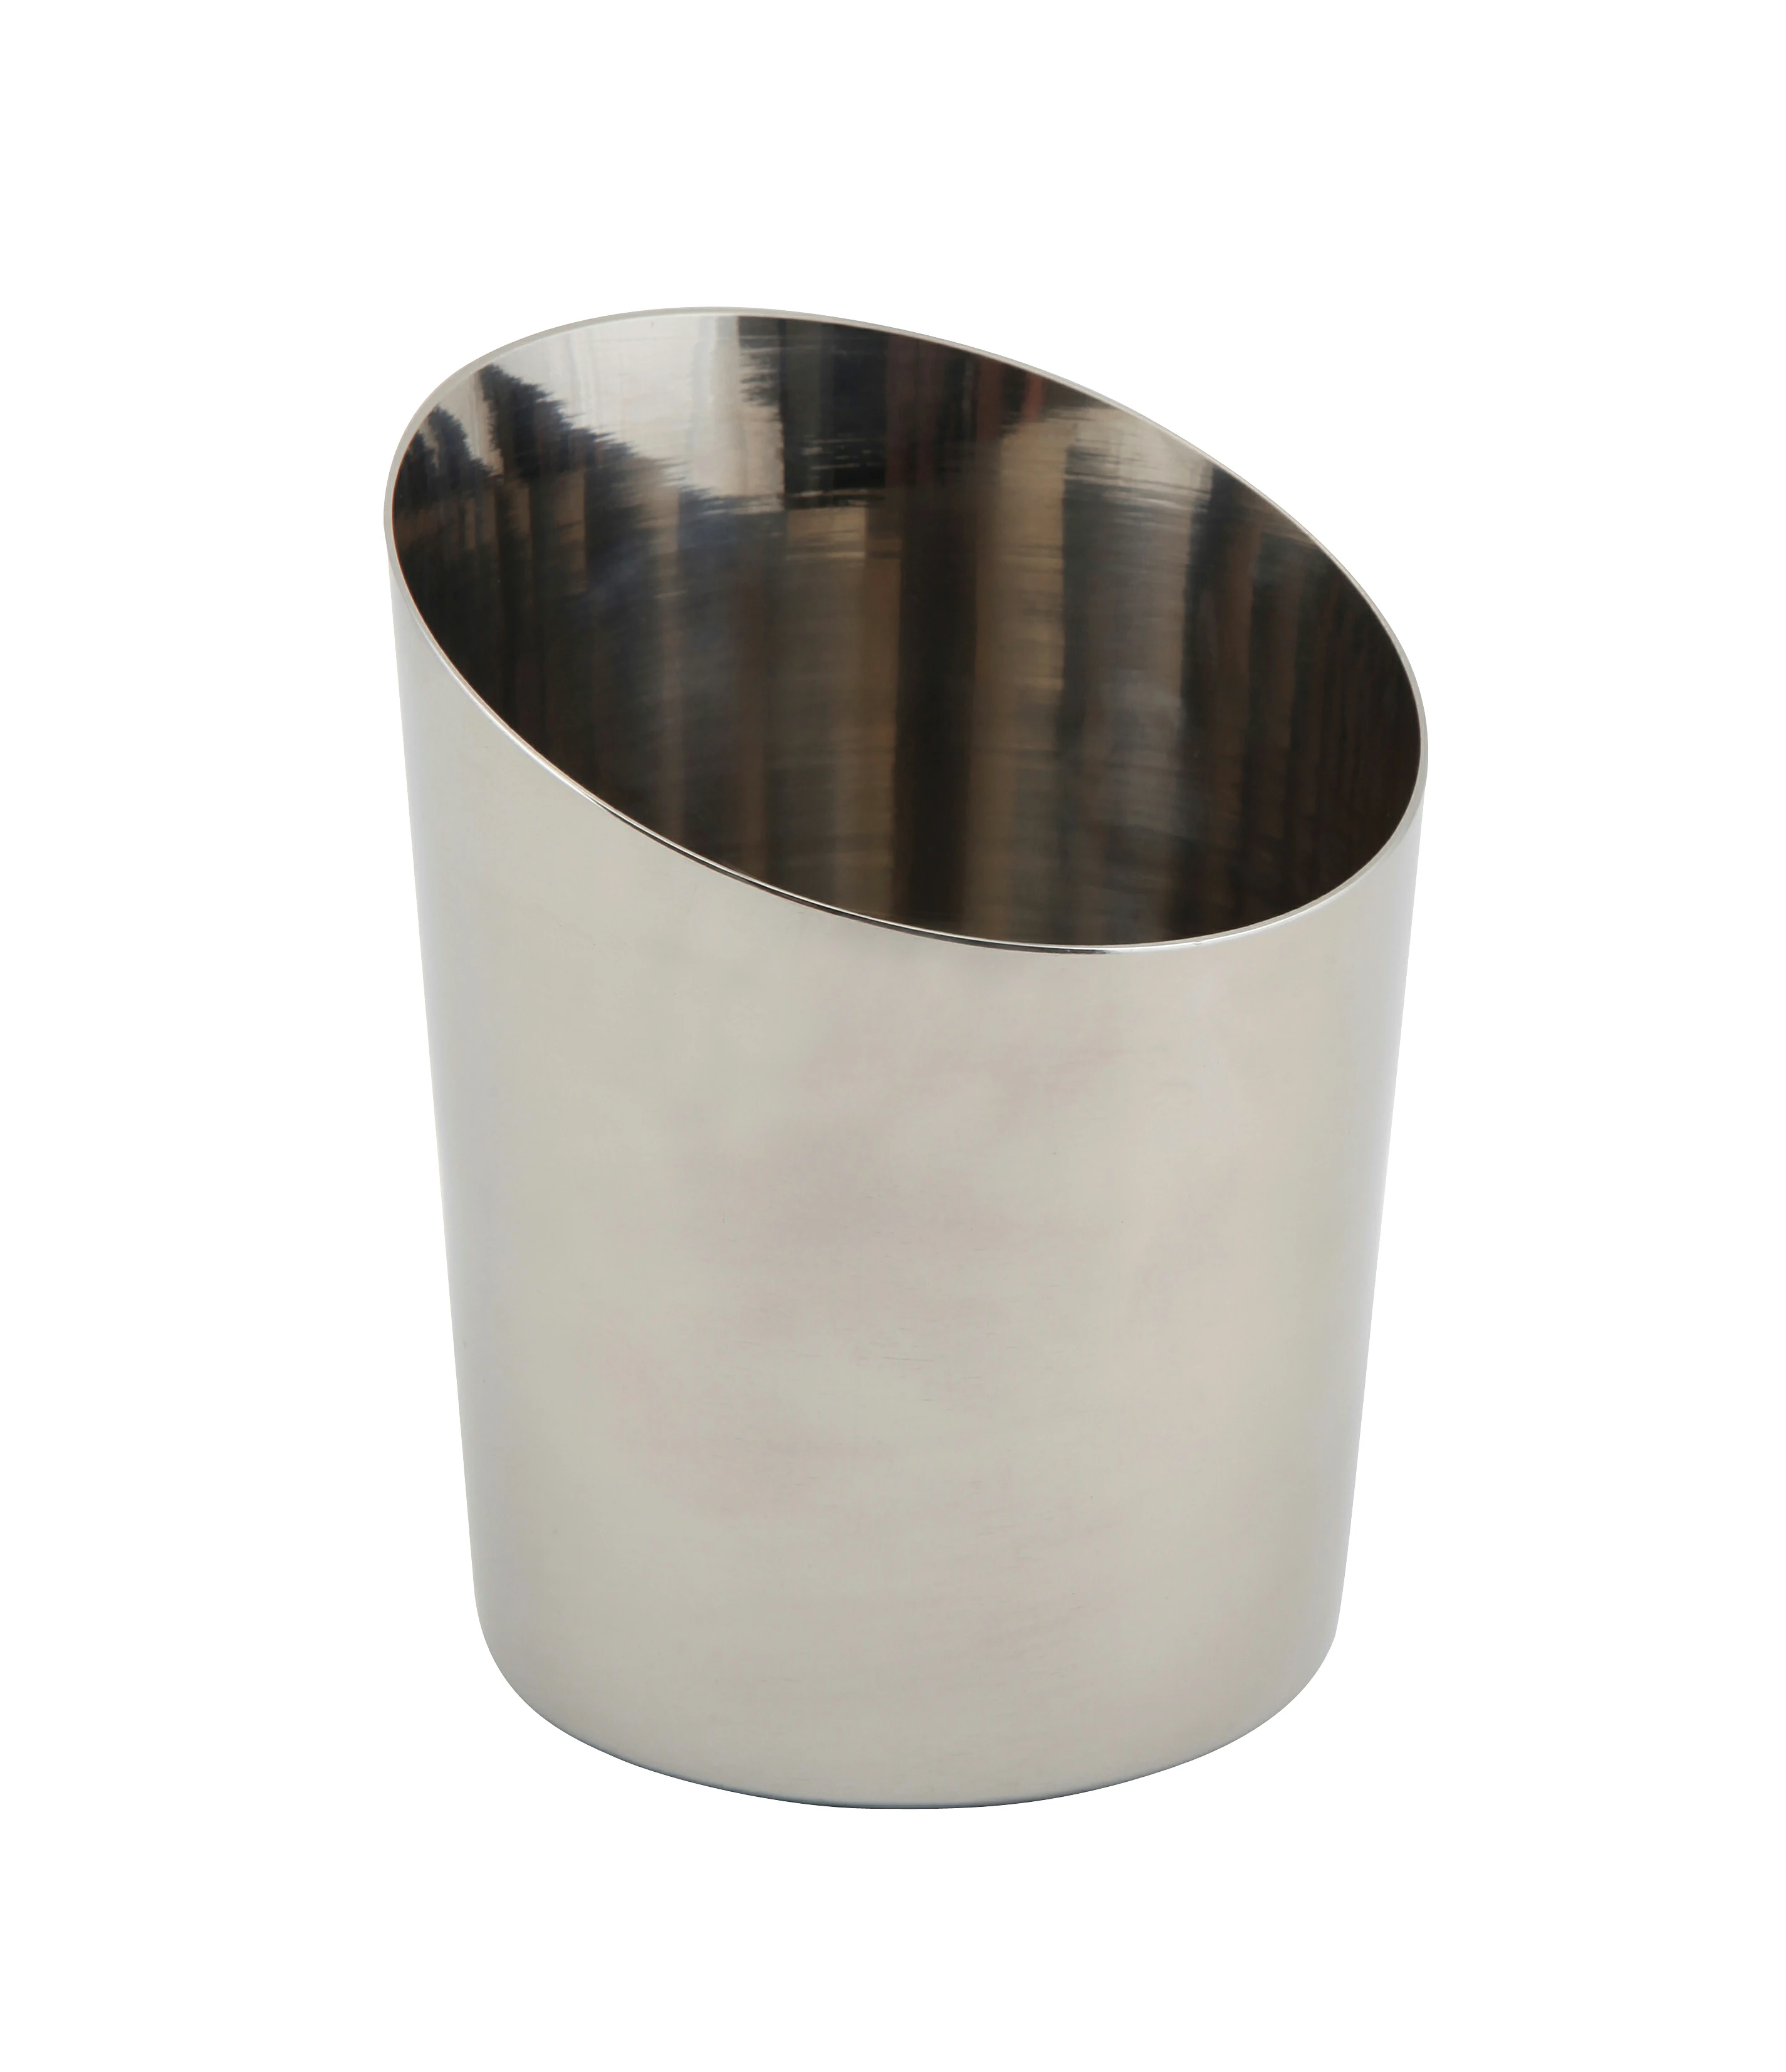 Stainless Steel Angled Cone 9.5 x 11.6cm (Dia x H)